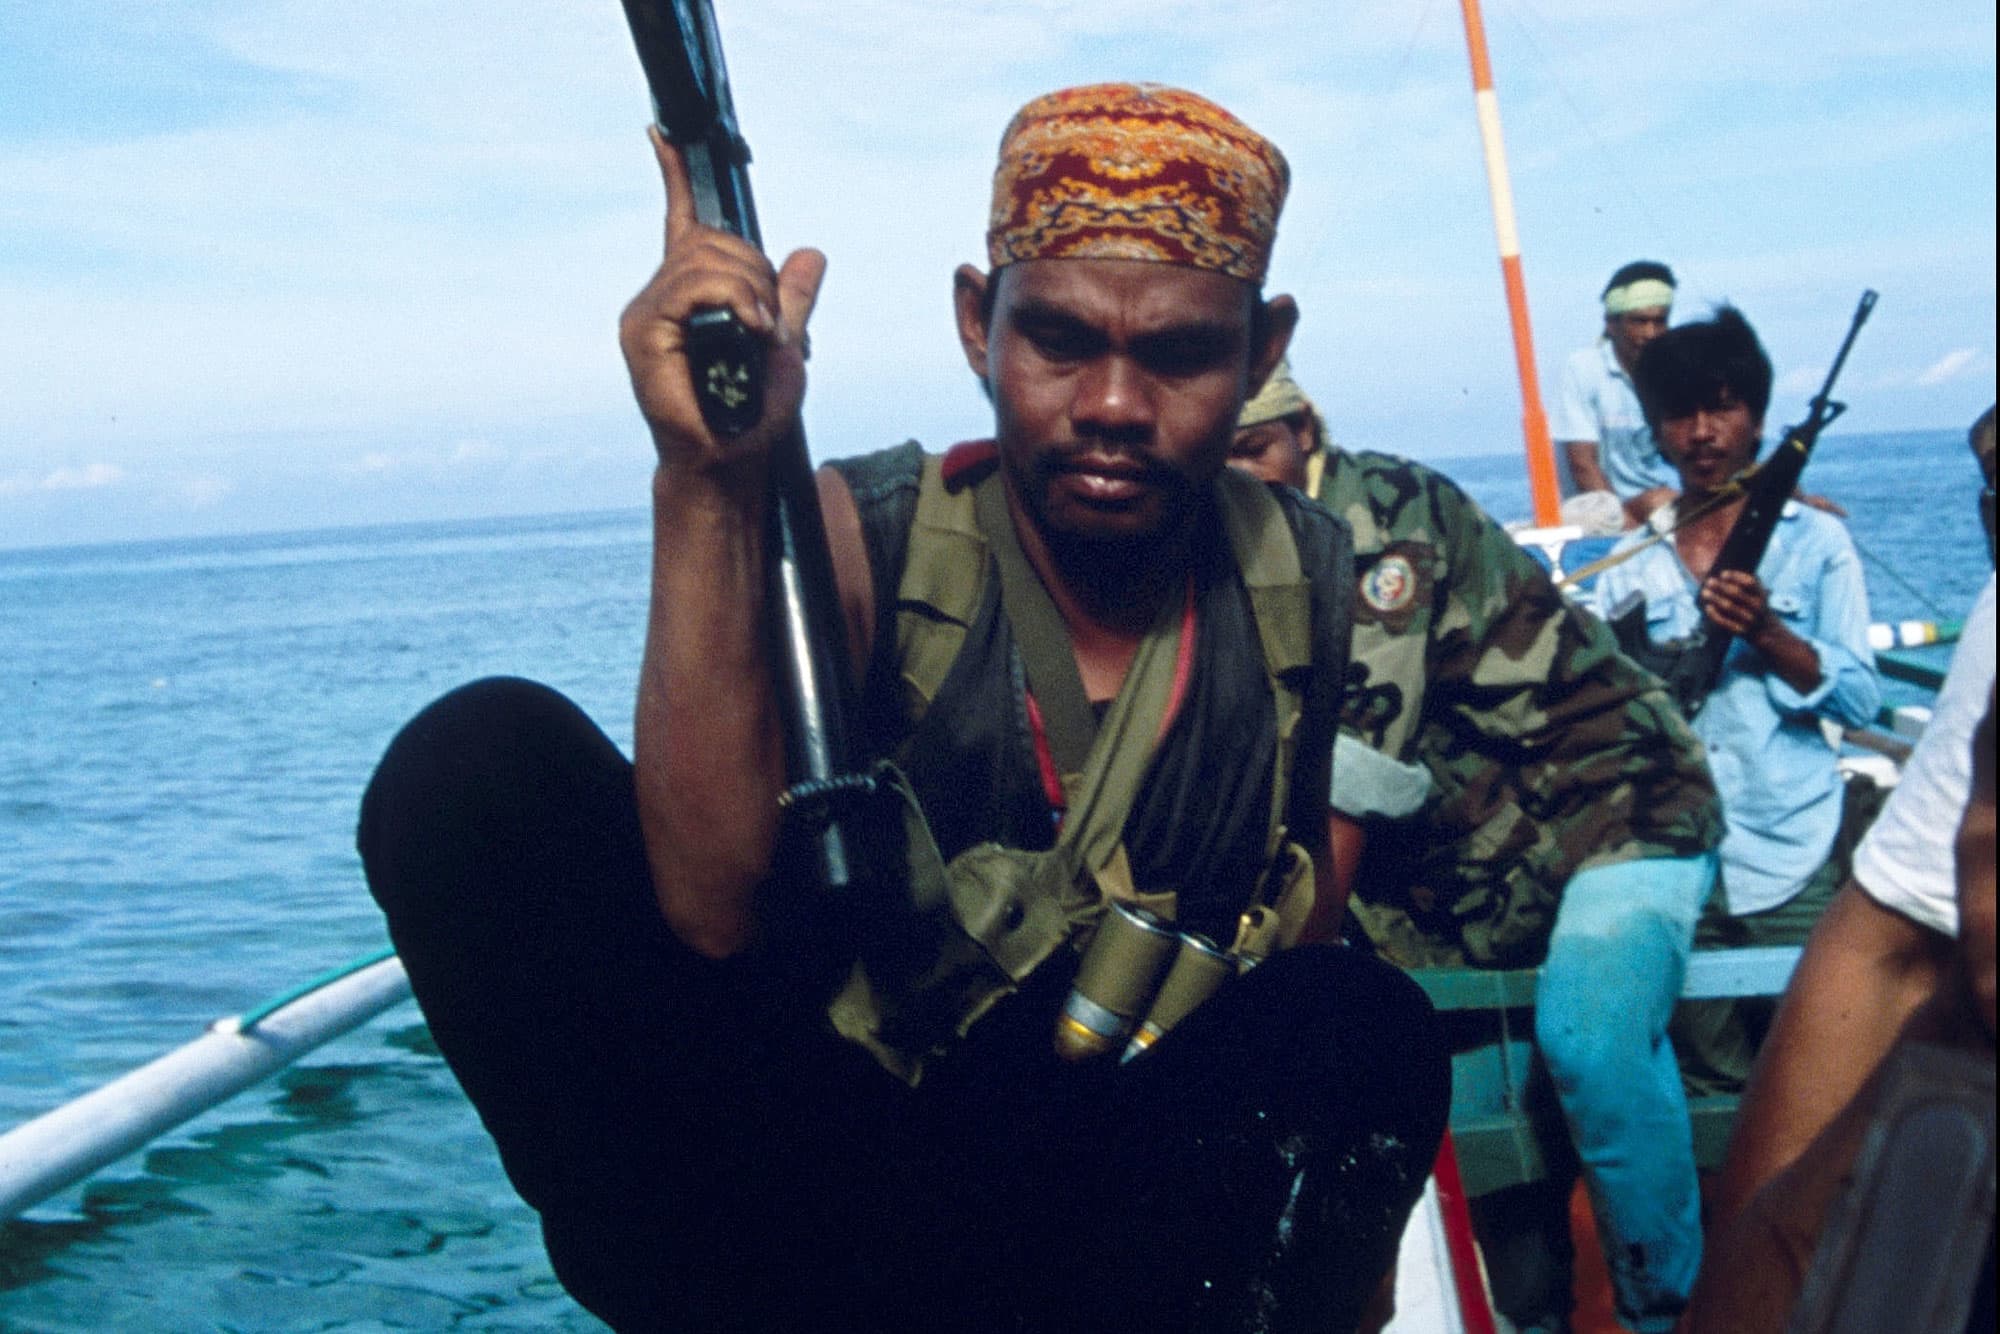 Maritime piracy is on the decline globally